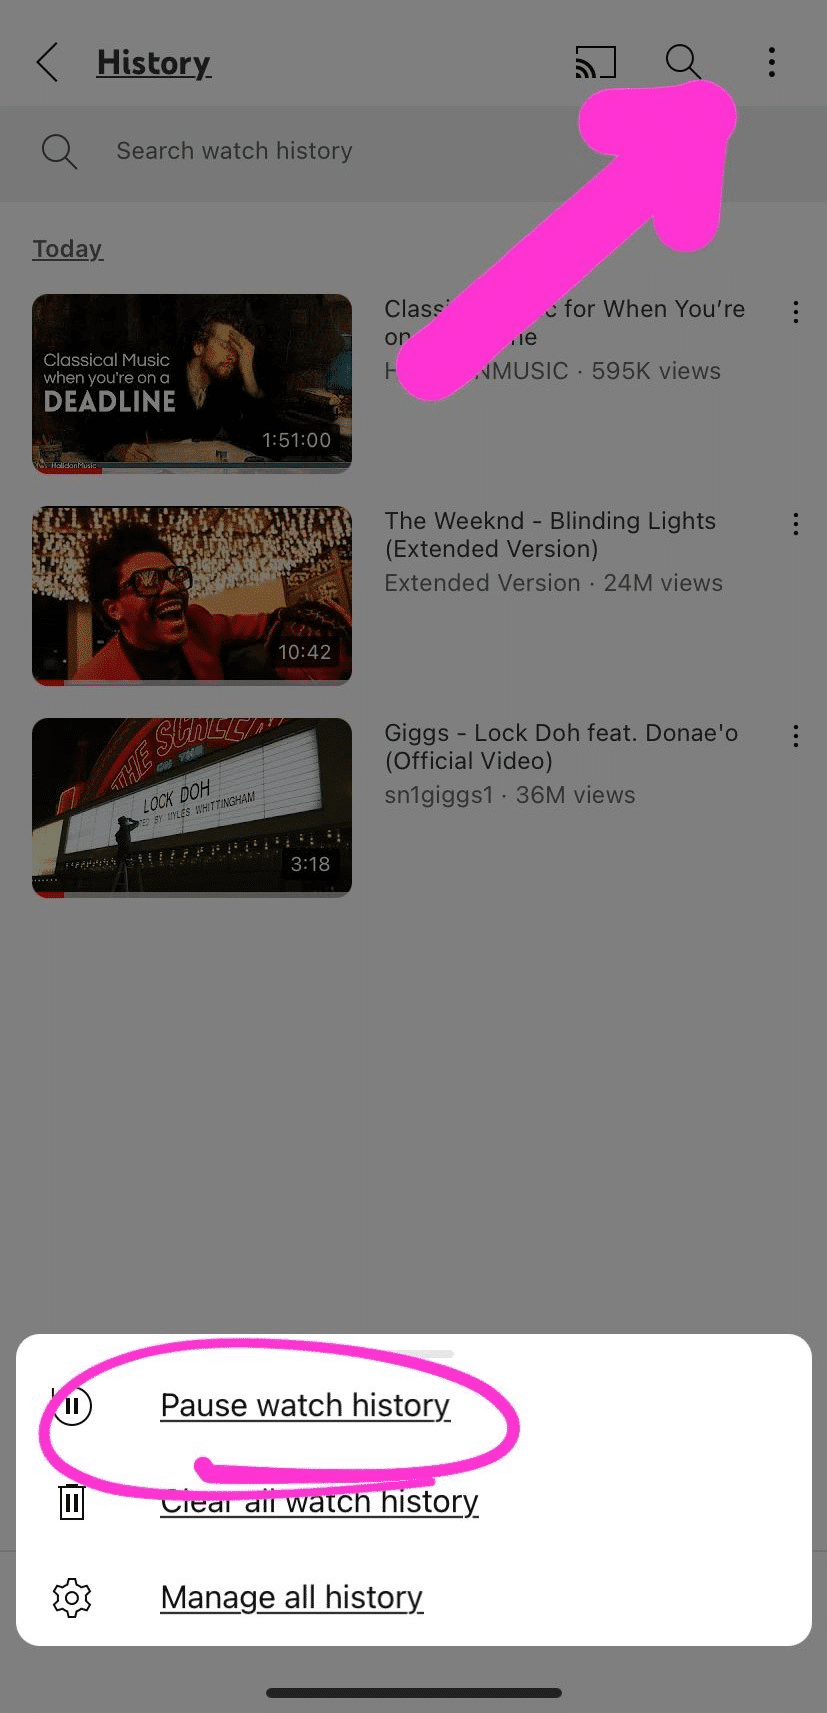 Three dots and Pause watch history" on a YouTube history.